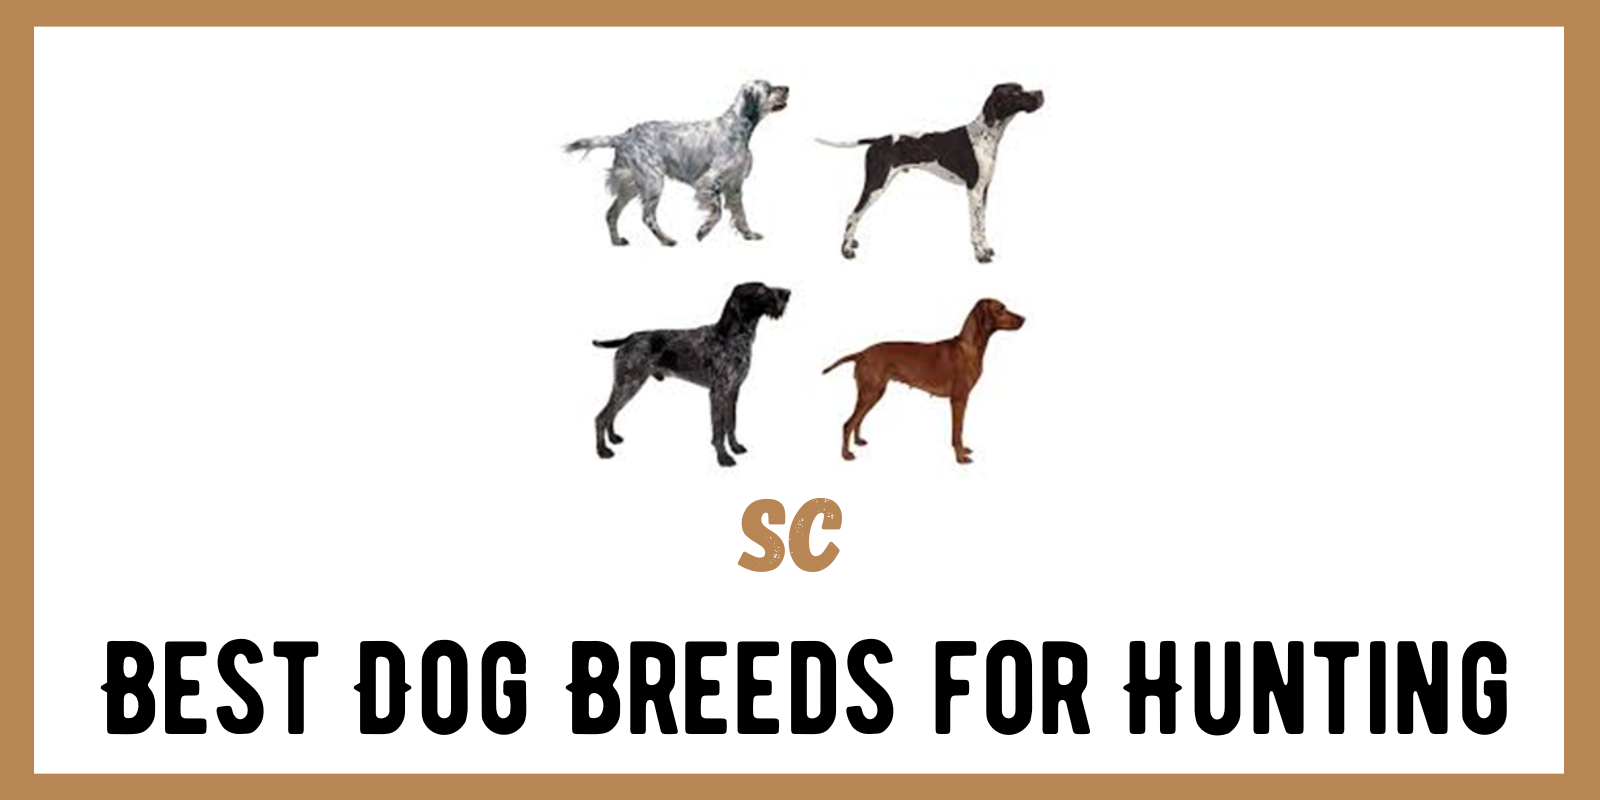 The Best Dog Breeds for Hunting